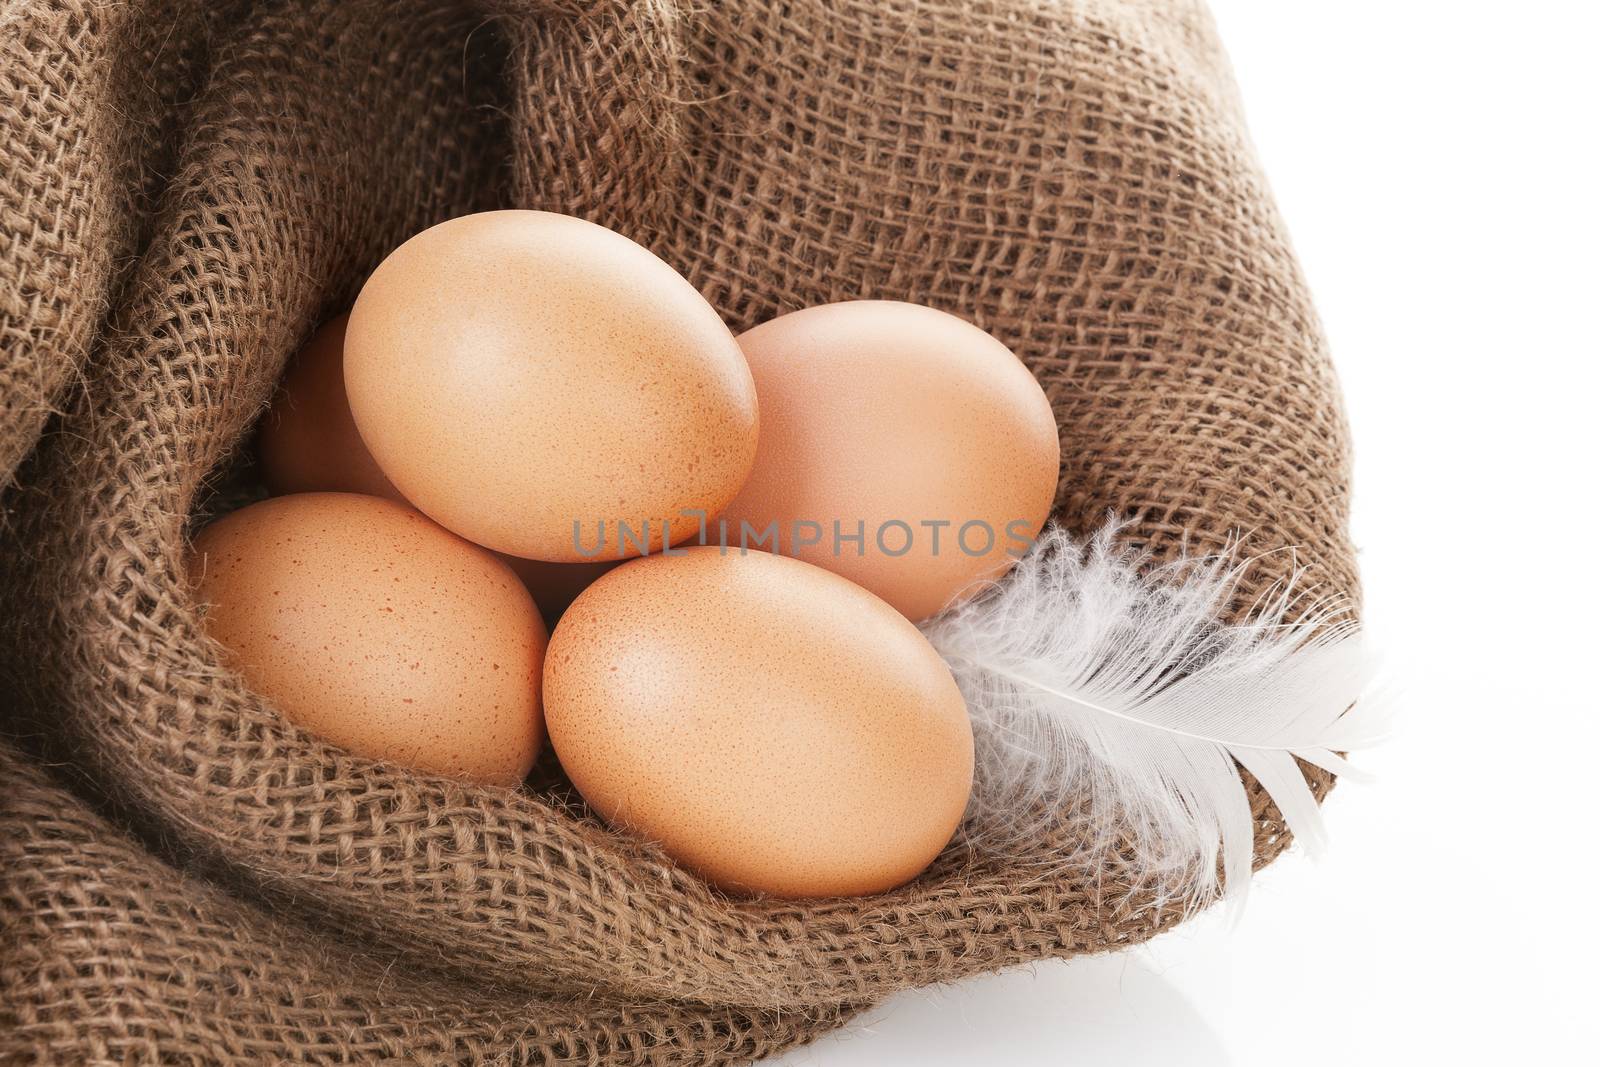 Organic chicken eggs in burlap bag isolated on white background.